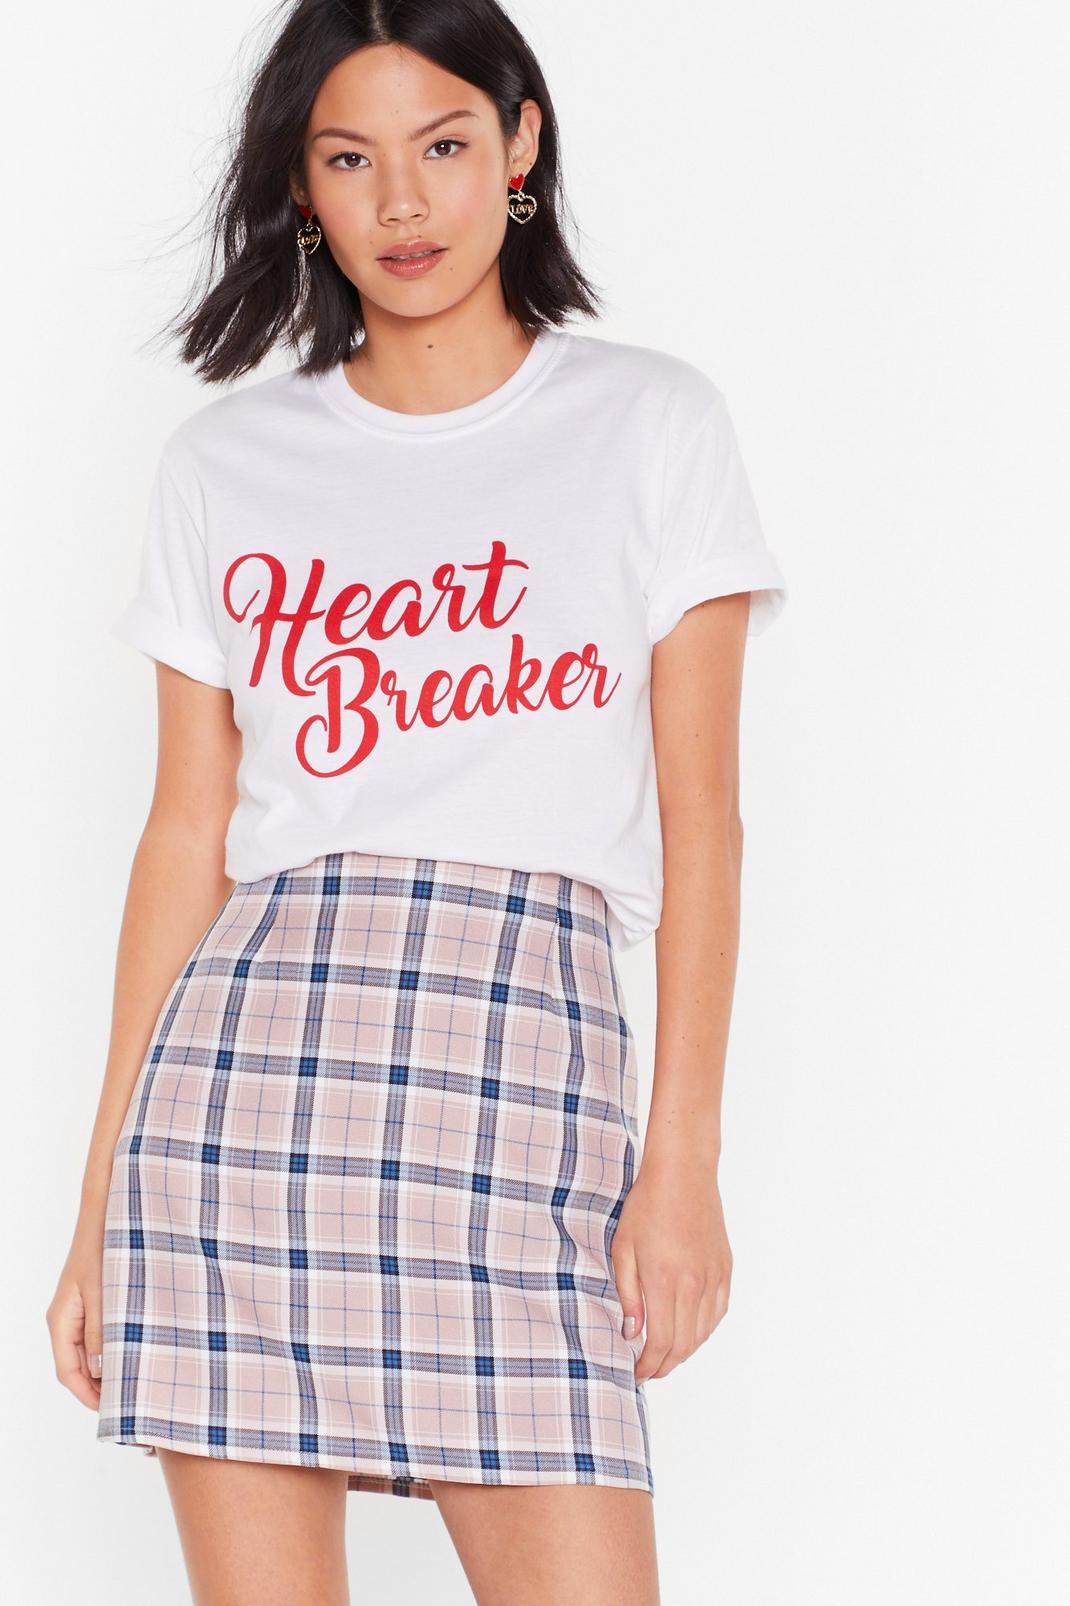 She's a Heartbreaker Graphic Tee image number 1